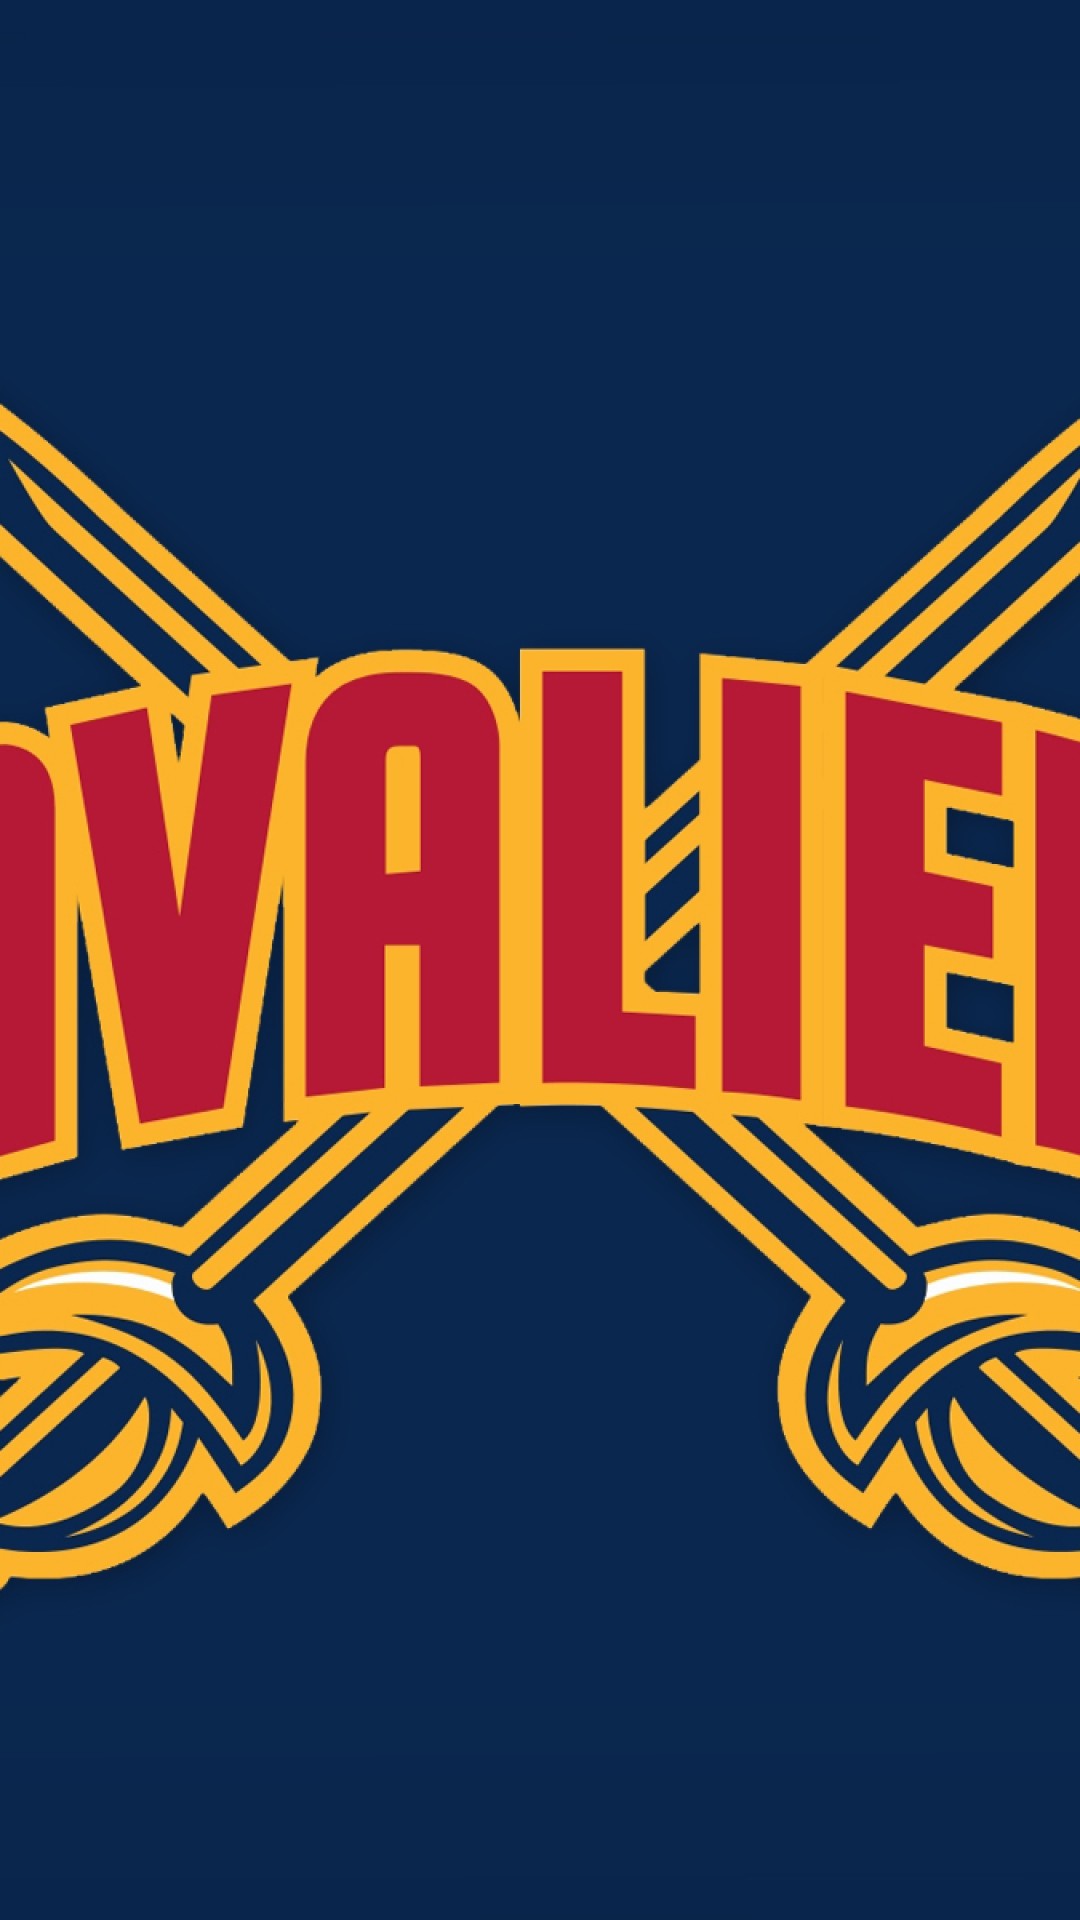 1080x1920 Cleveland Cavaliers Wallpaper iPhone 6